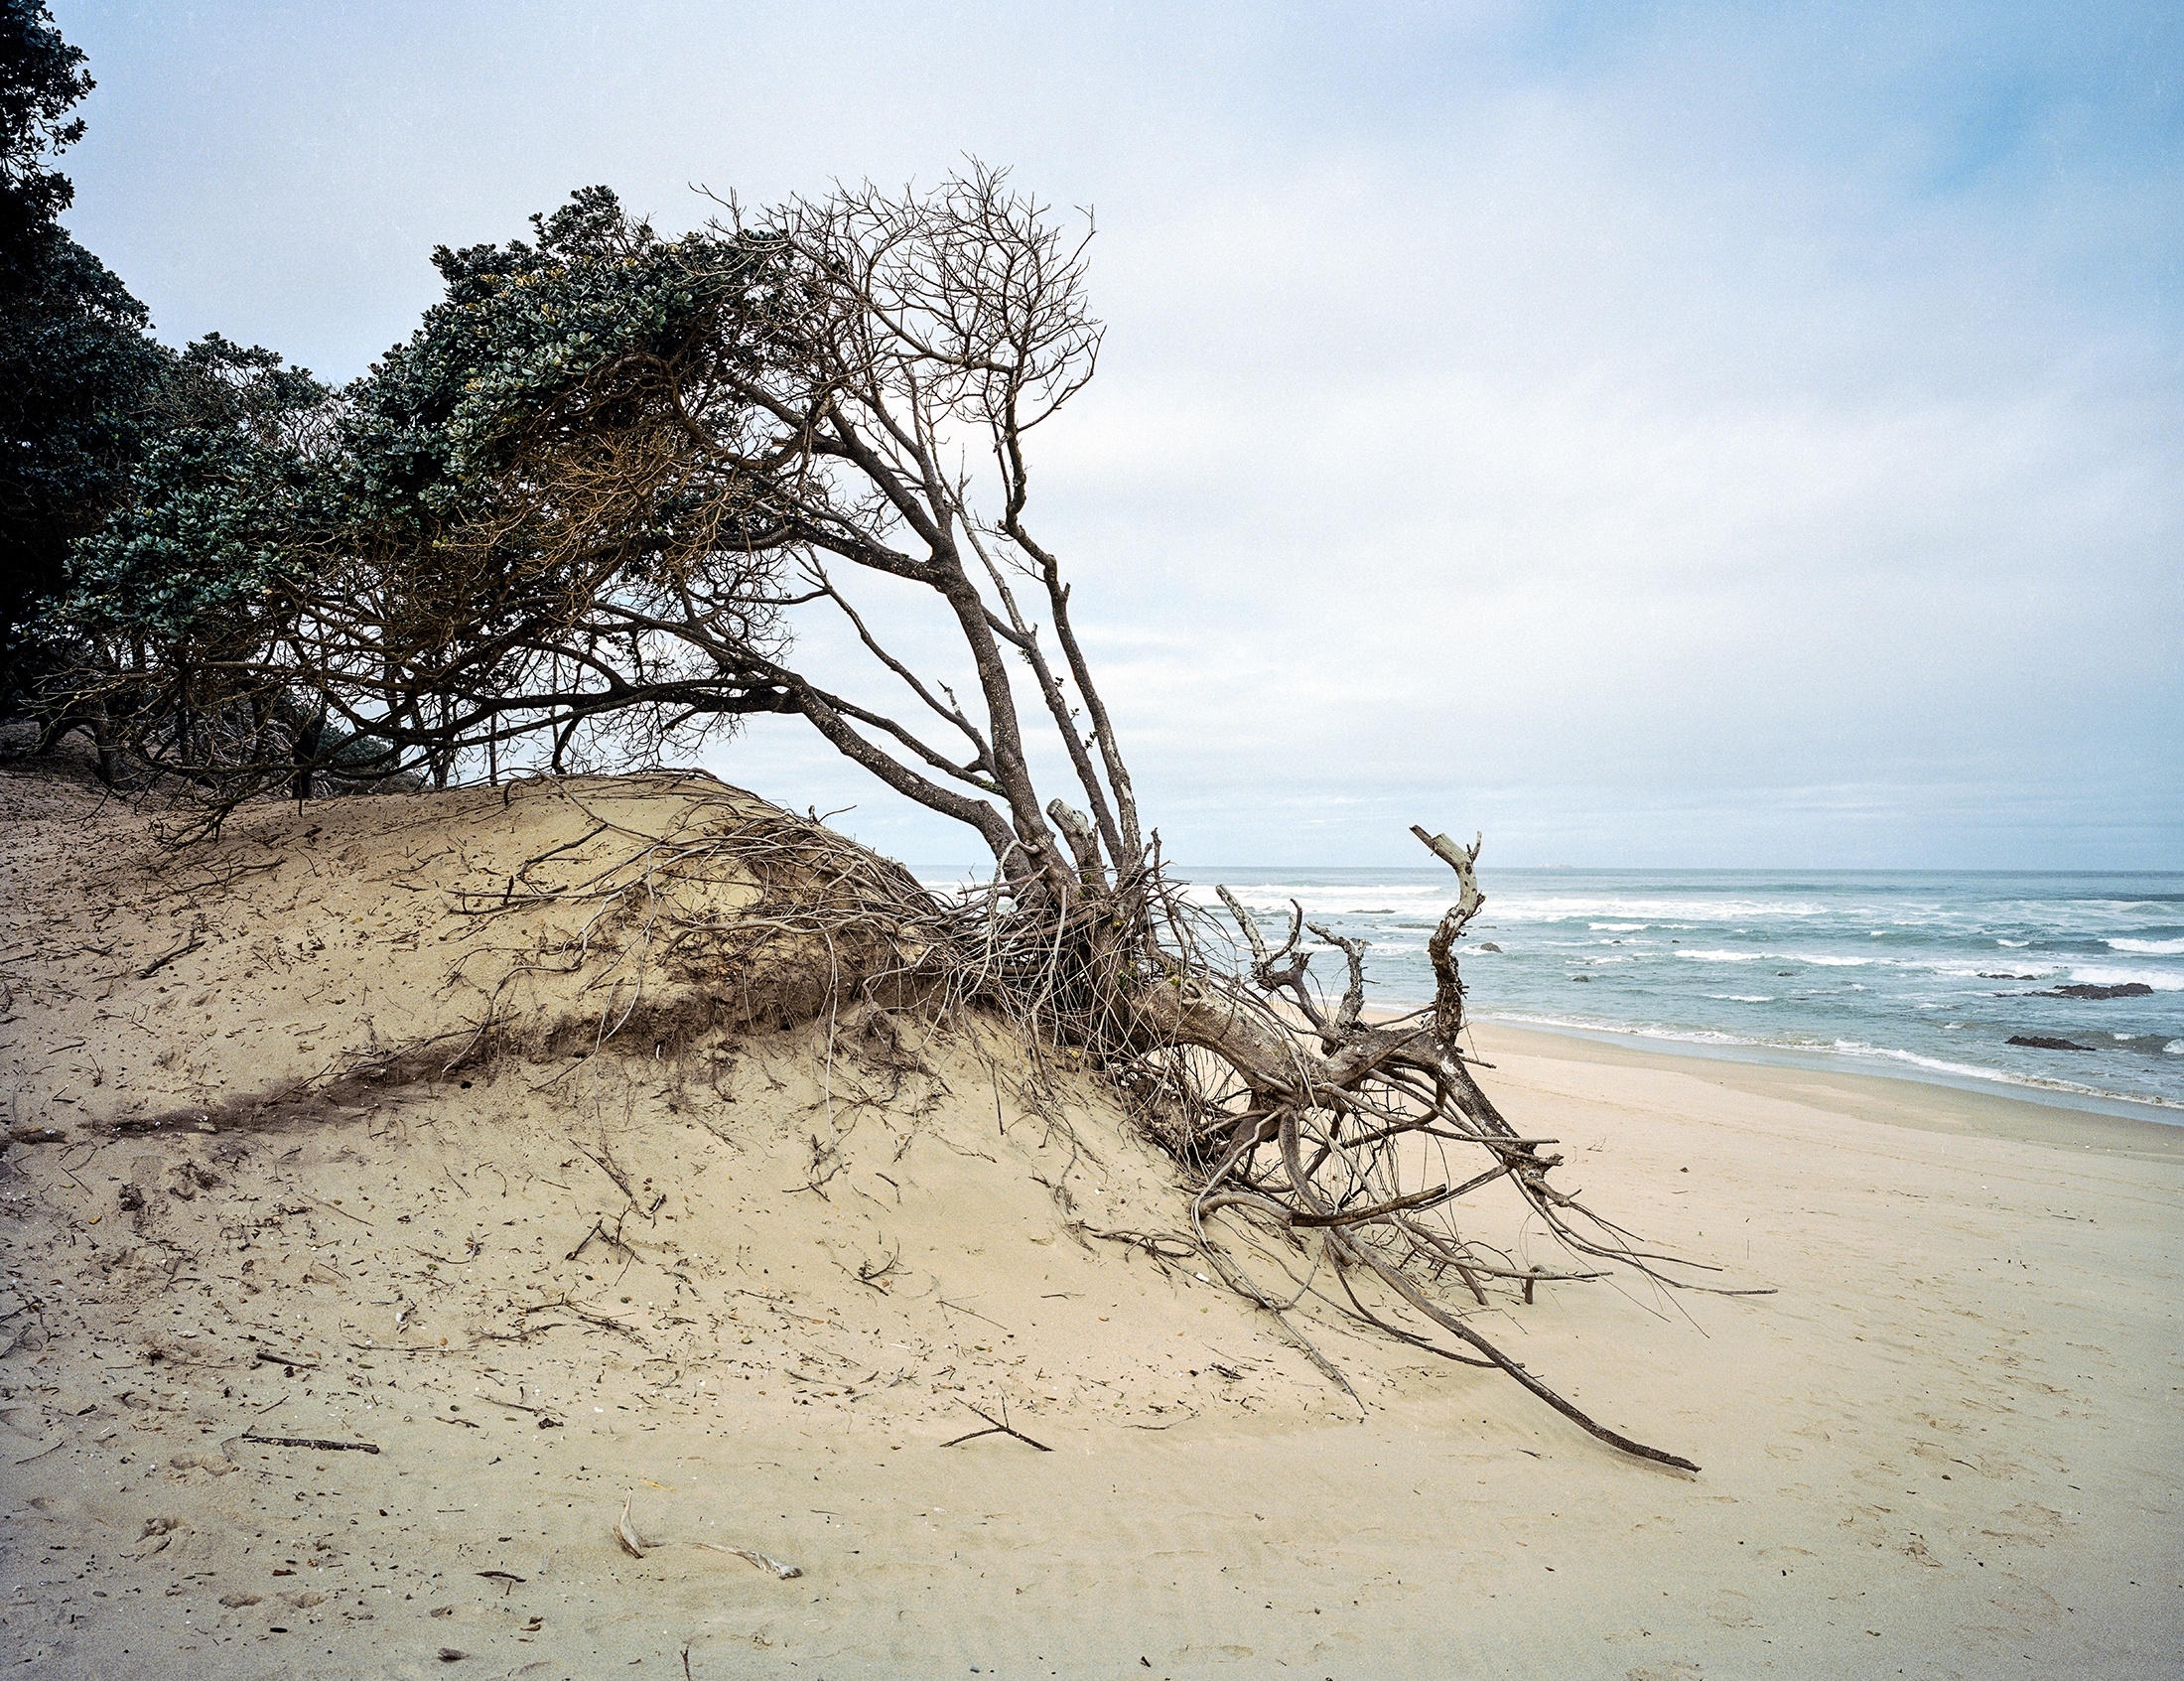 Lindokuhle Sobekwa's photograph 'Ngqeleni' depicts a tree growing on seaside sand dune with its roots partially exposed.
